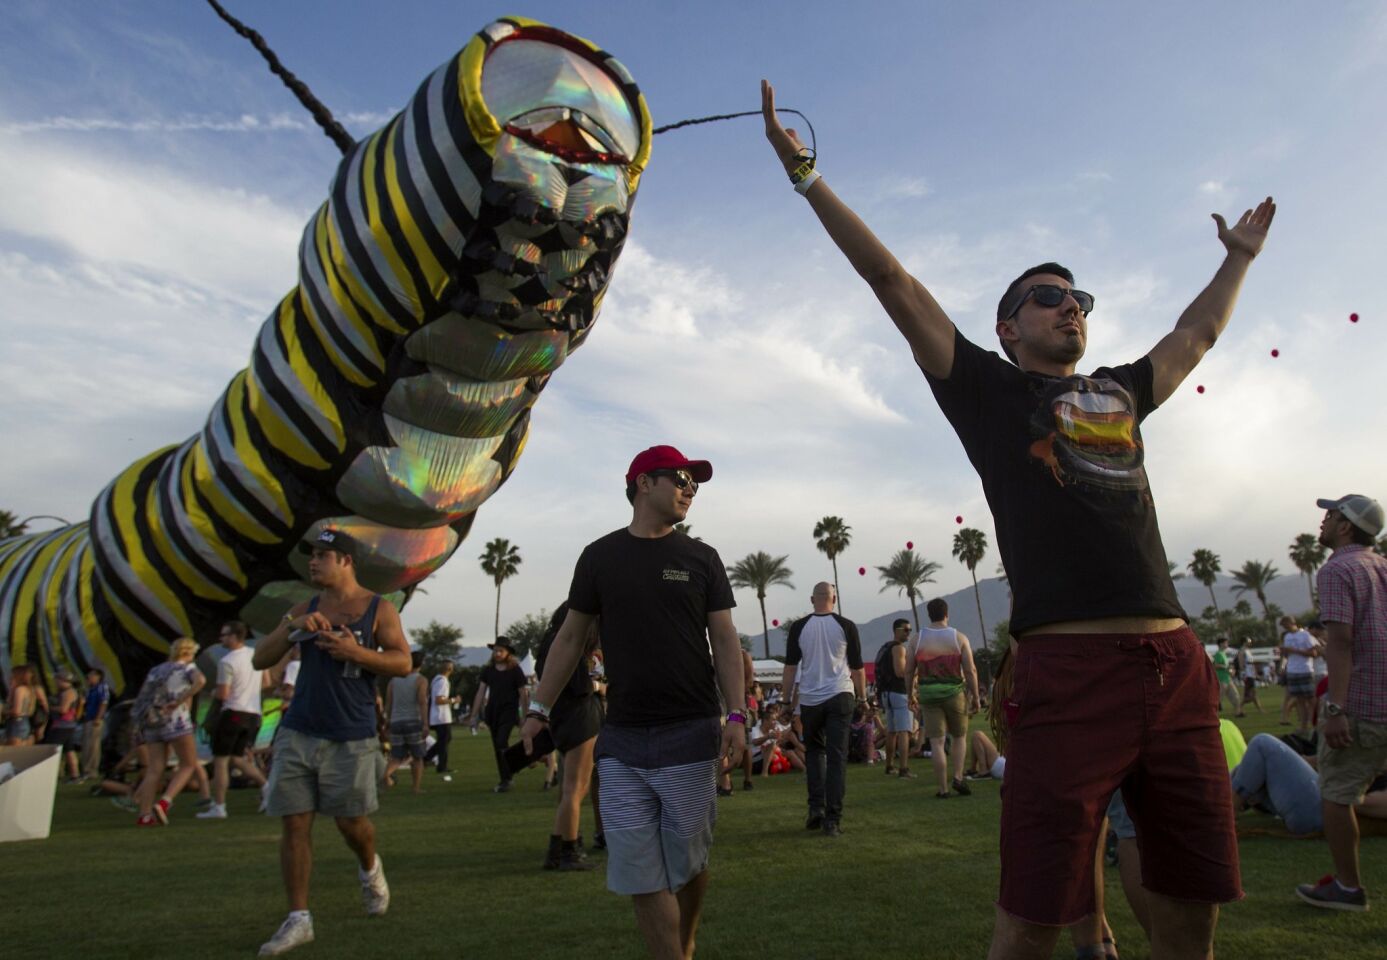 The 2015 Coachella Valley Music and Arts Festival gets underway. Jonathan Martinez holds his hands high in front of the giant Caterpillar Papilio Merraculous.